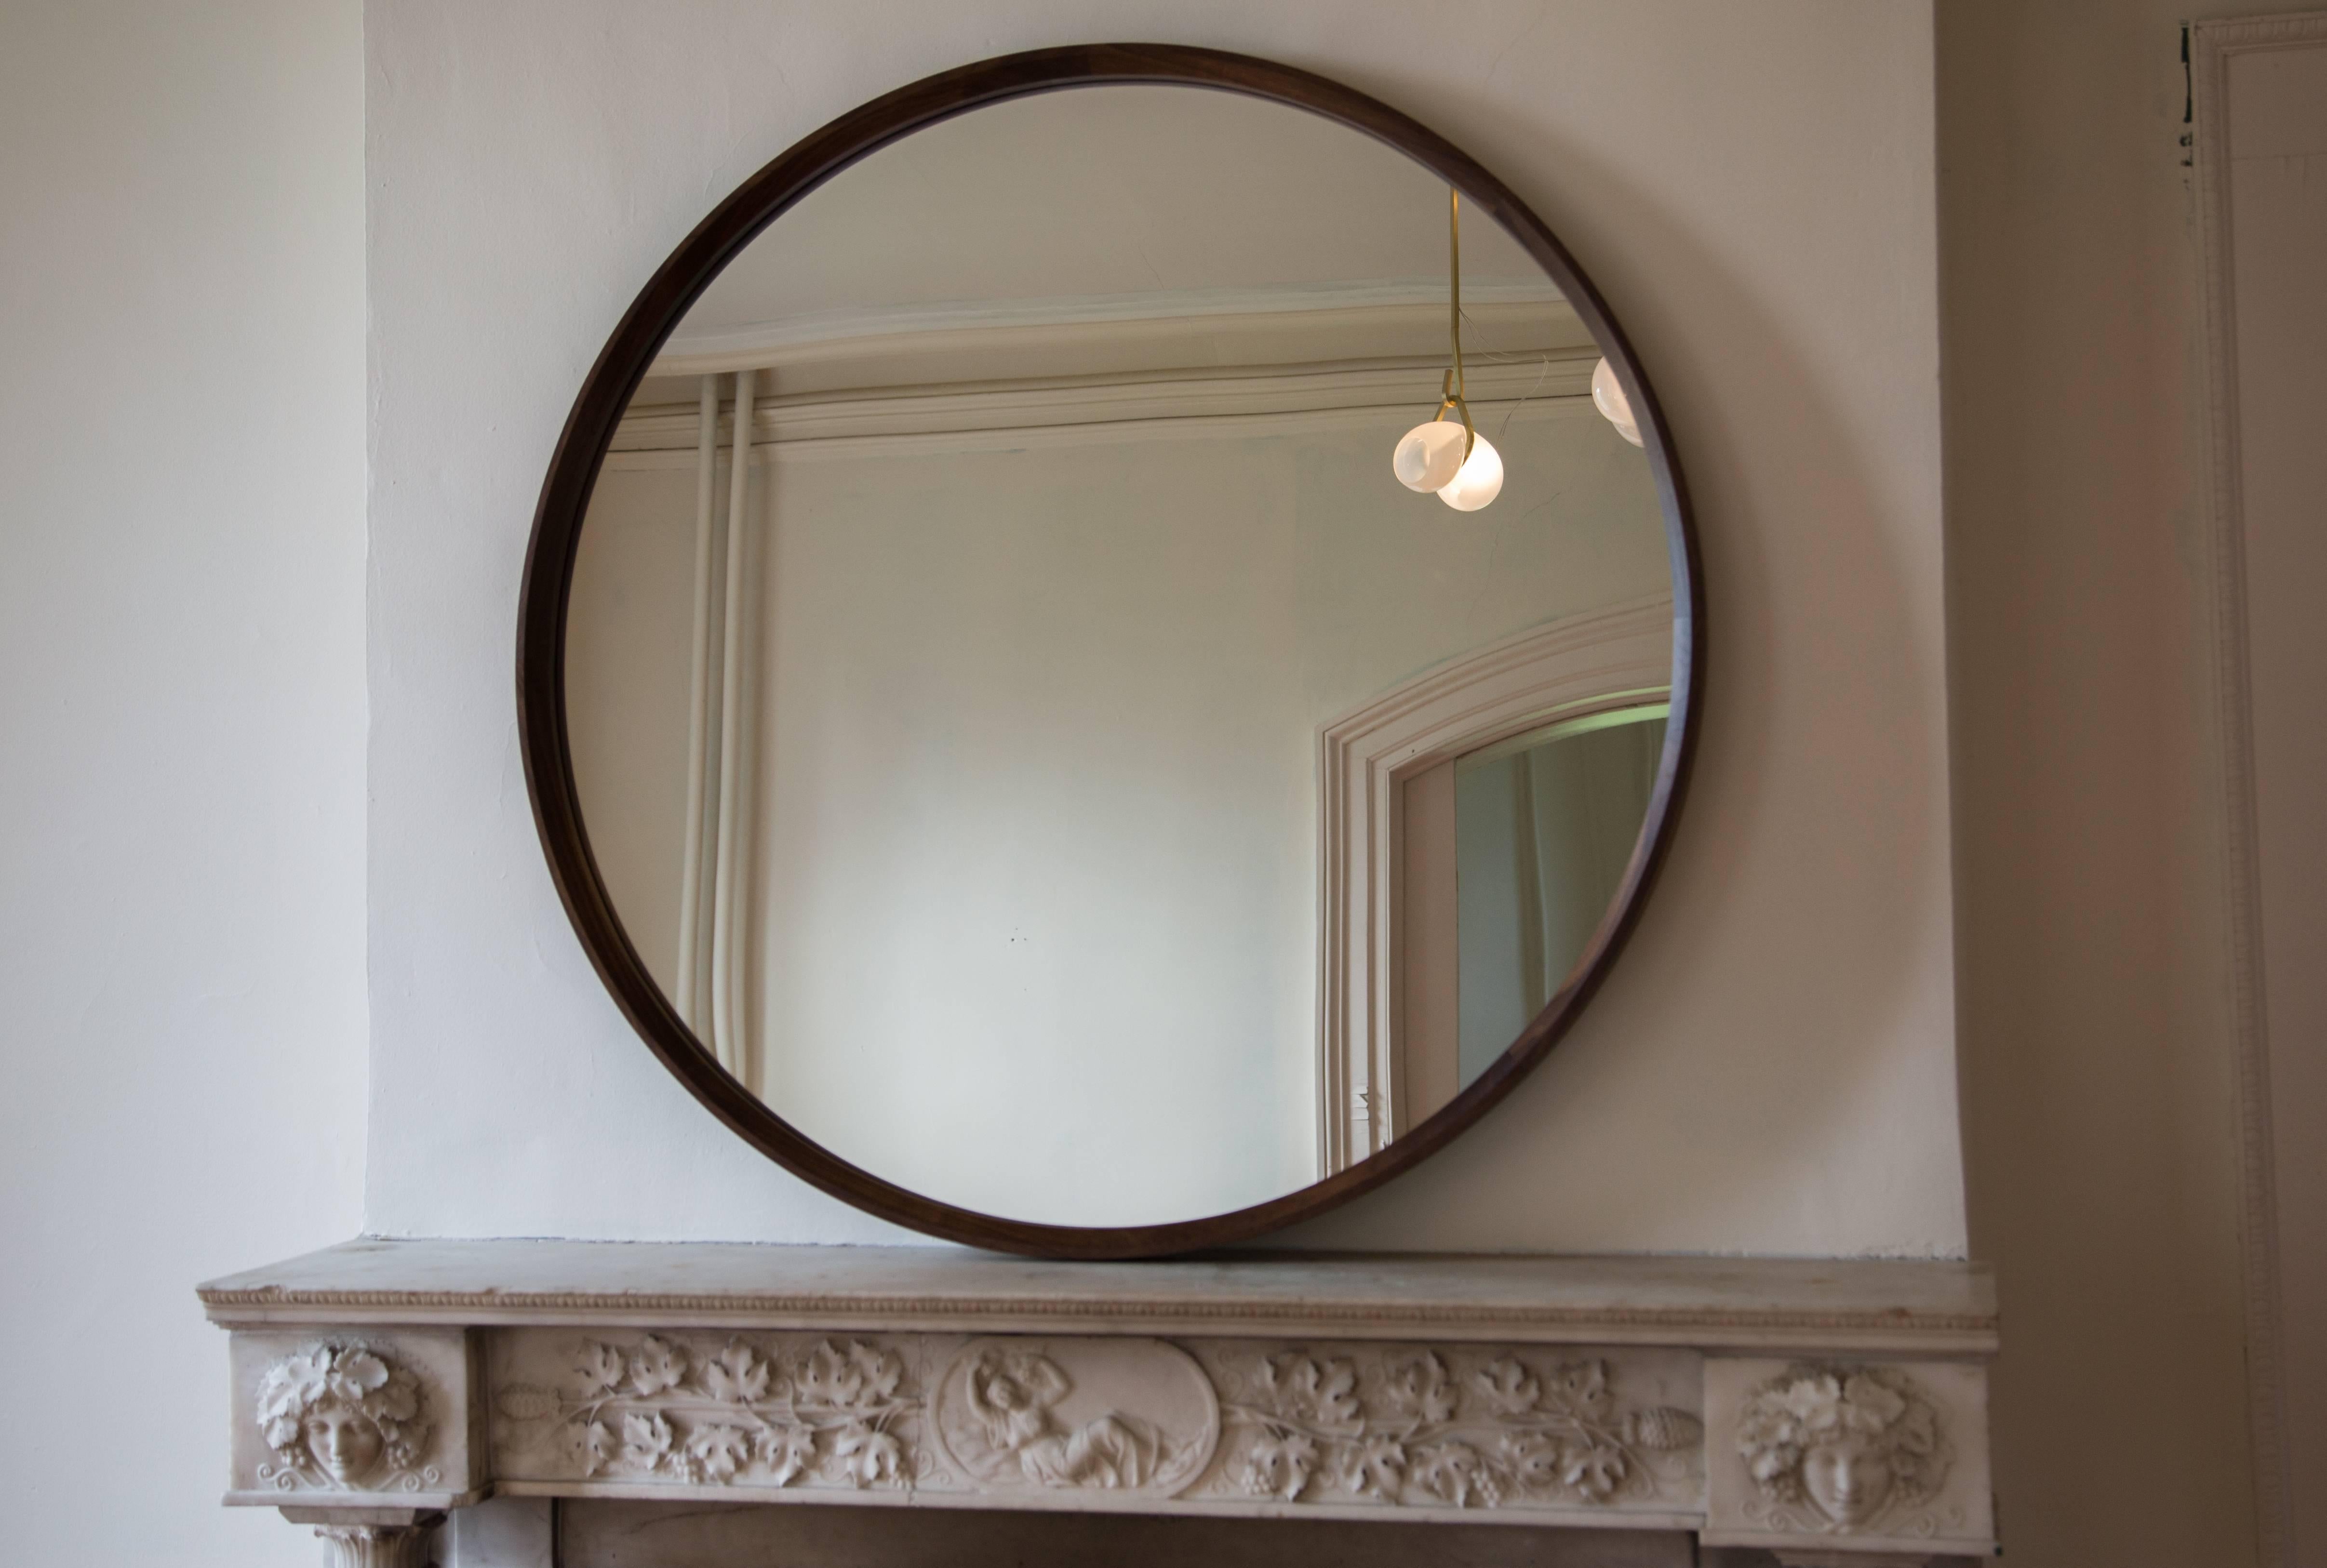 This simple, elegant mirror features a large interior bevel around the wooden frame creating a beautiful thin outer rim. Walnut frame shown in circular wall mounted version and rectangular full-length floor version.

Made to order in custom sizes,